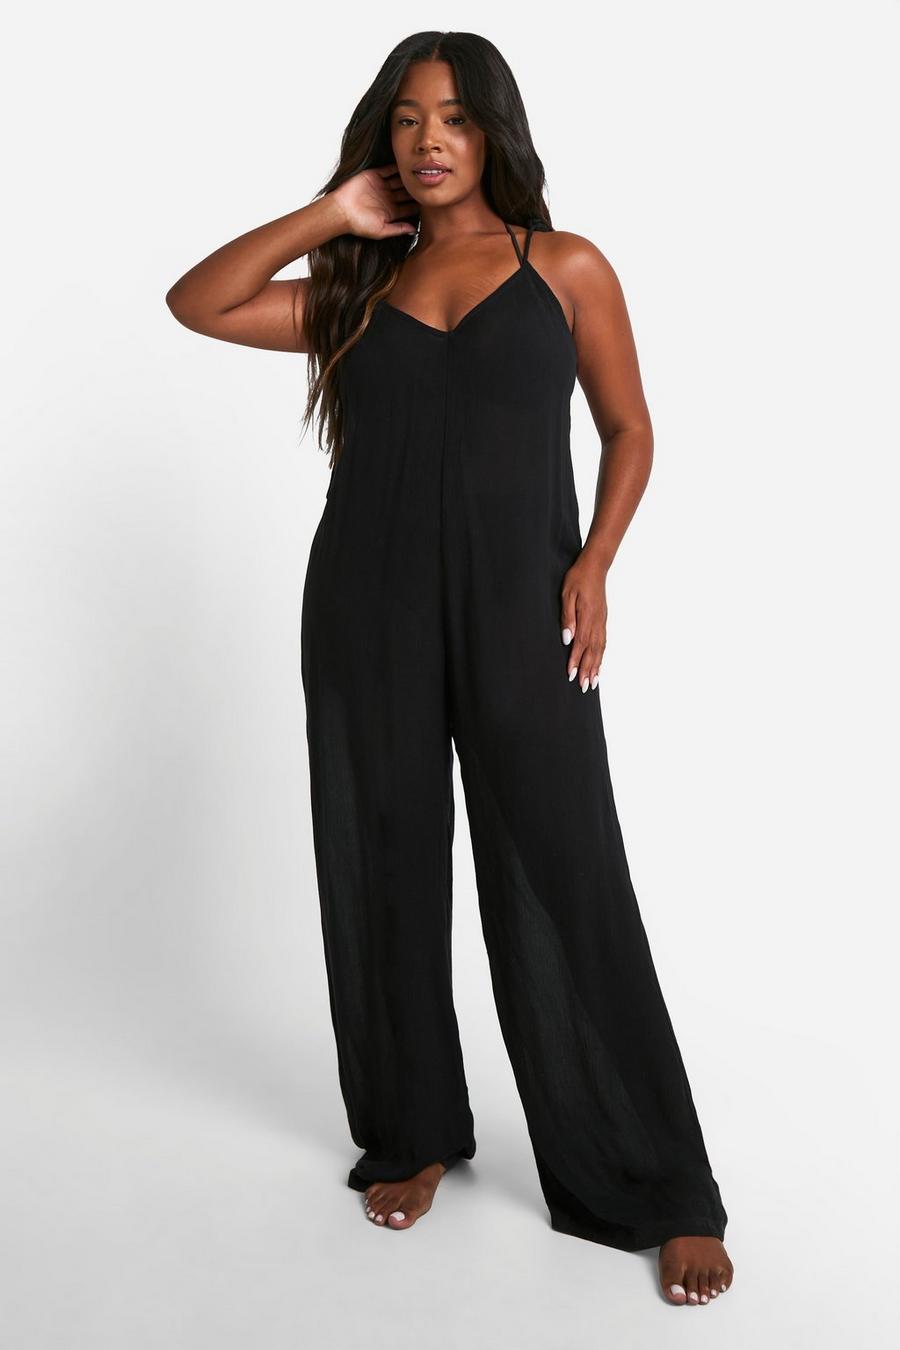 Black Plus Strappy Cheesecloth Wide Leg Beach Jumpsuit